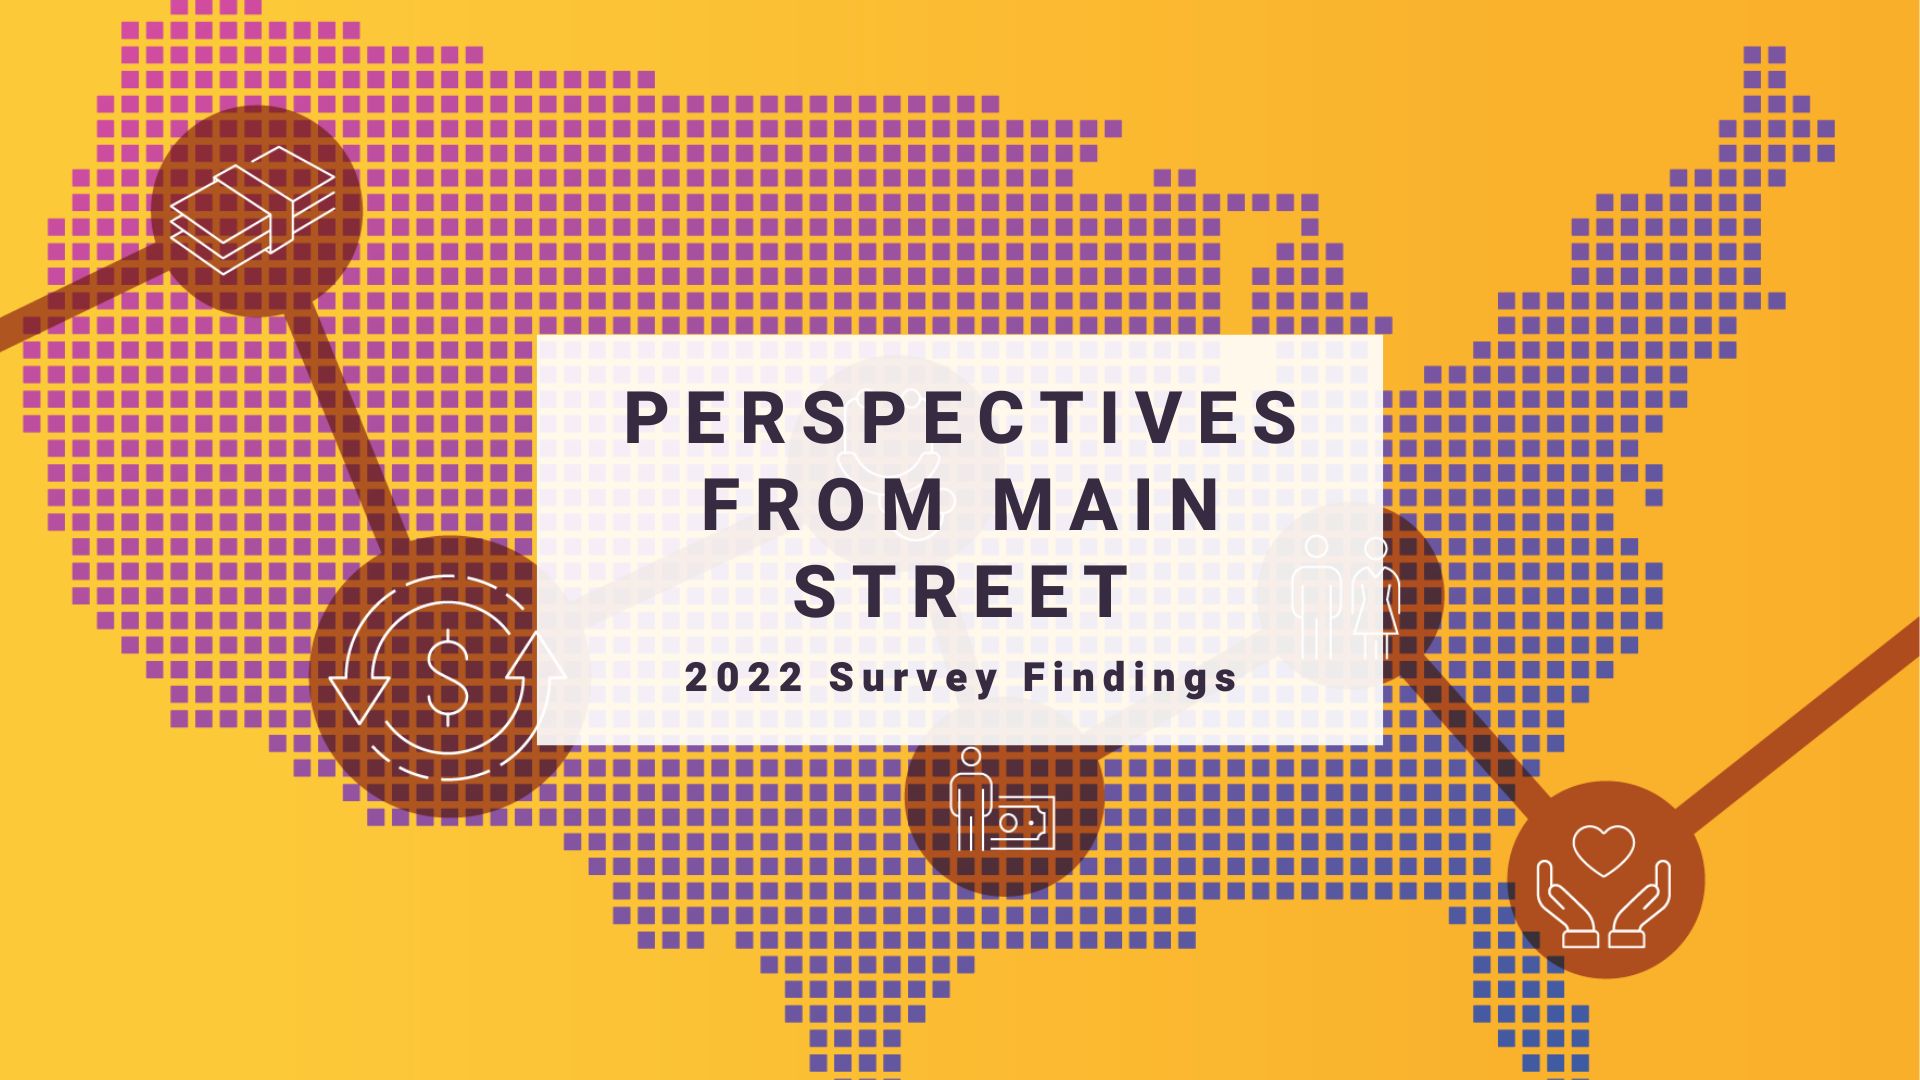 Perspectives from Main Street 2022 Survey Findings